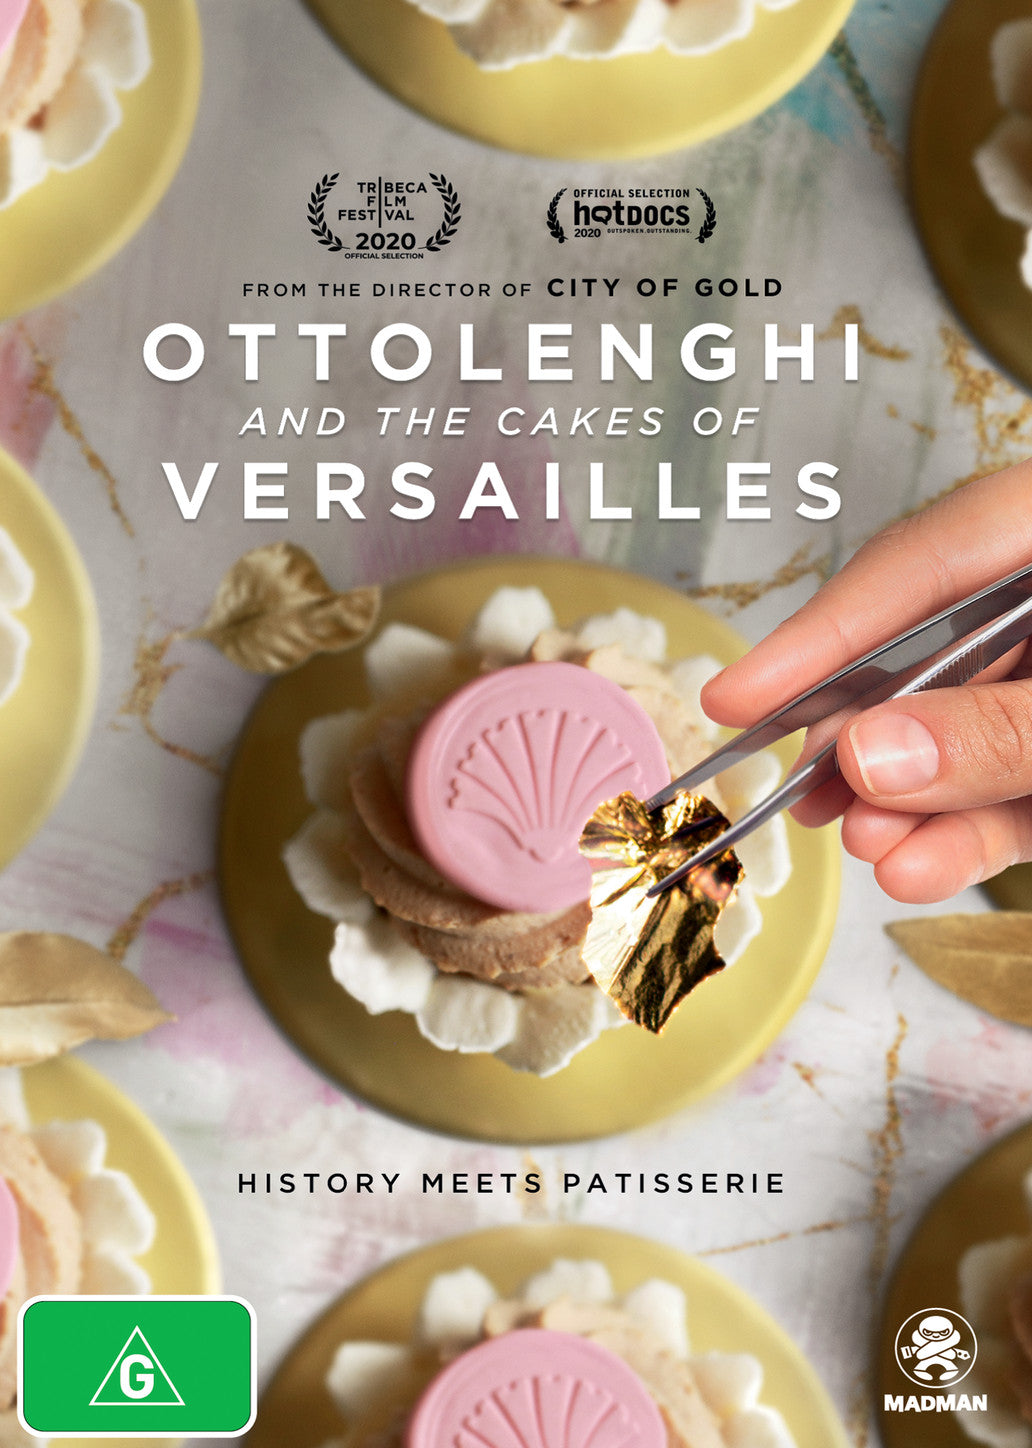 OTTOLENGHI AND THE CAKES OF VERSAILLES